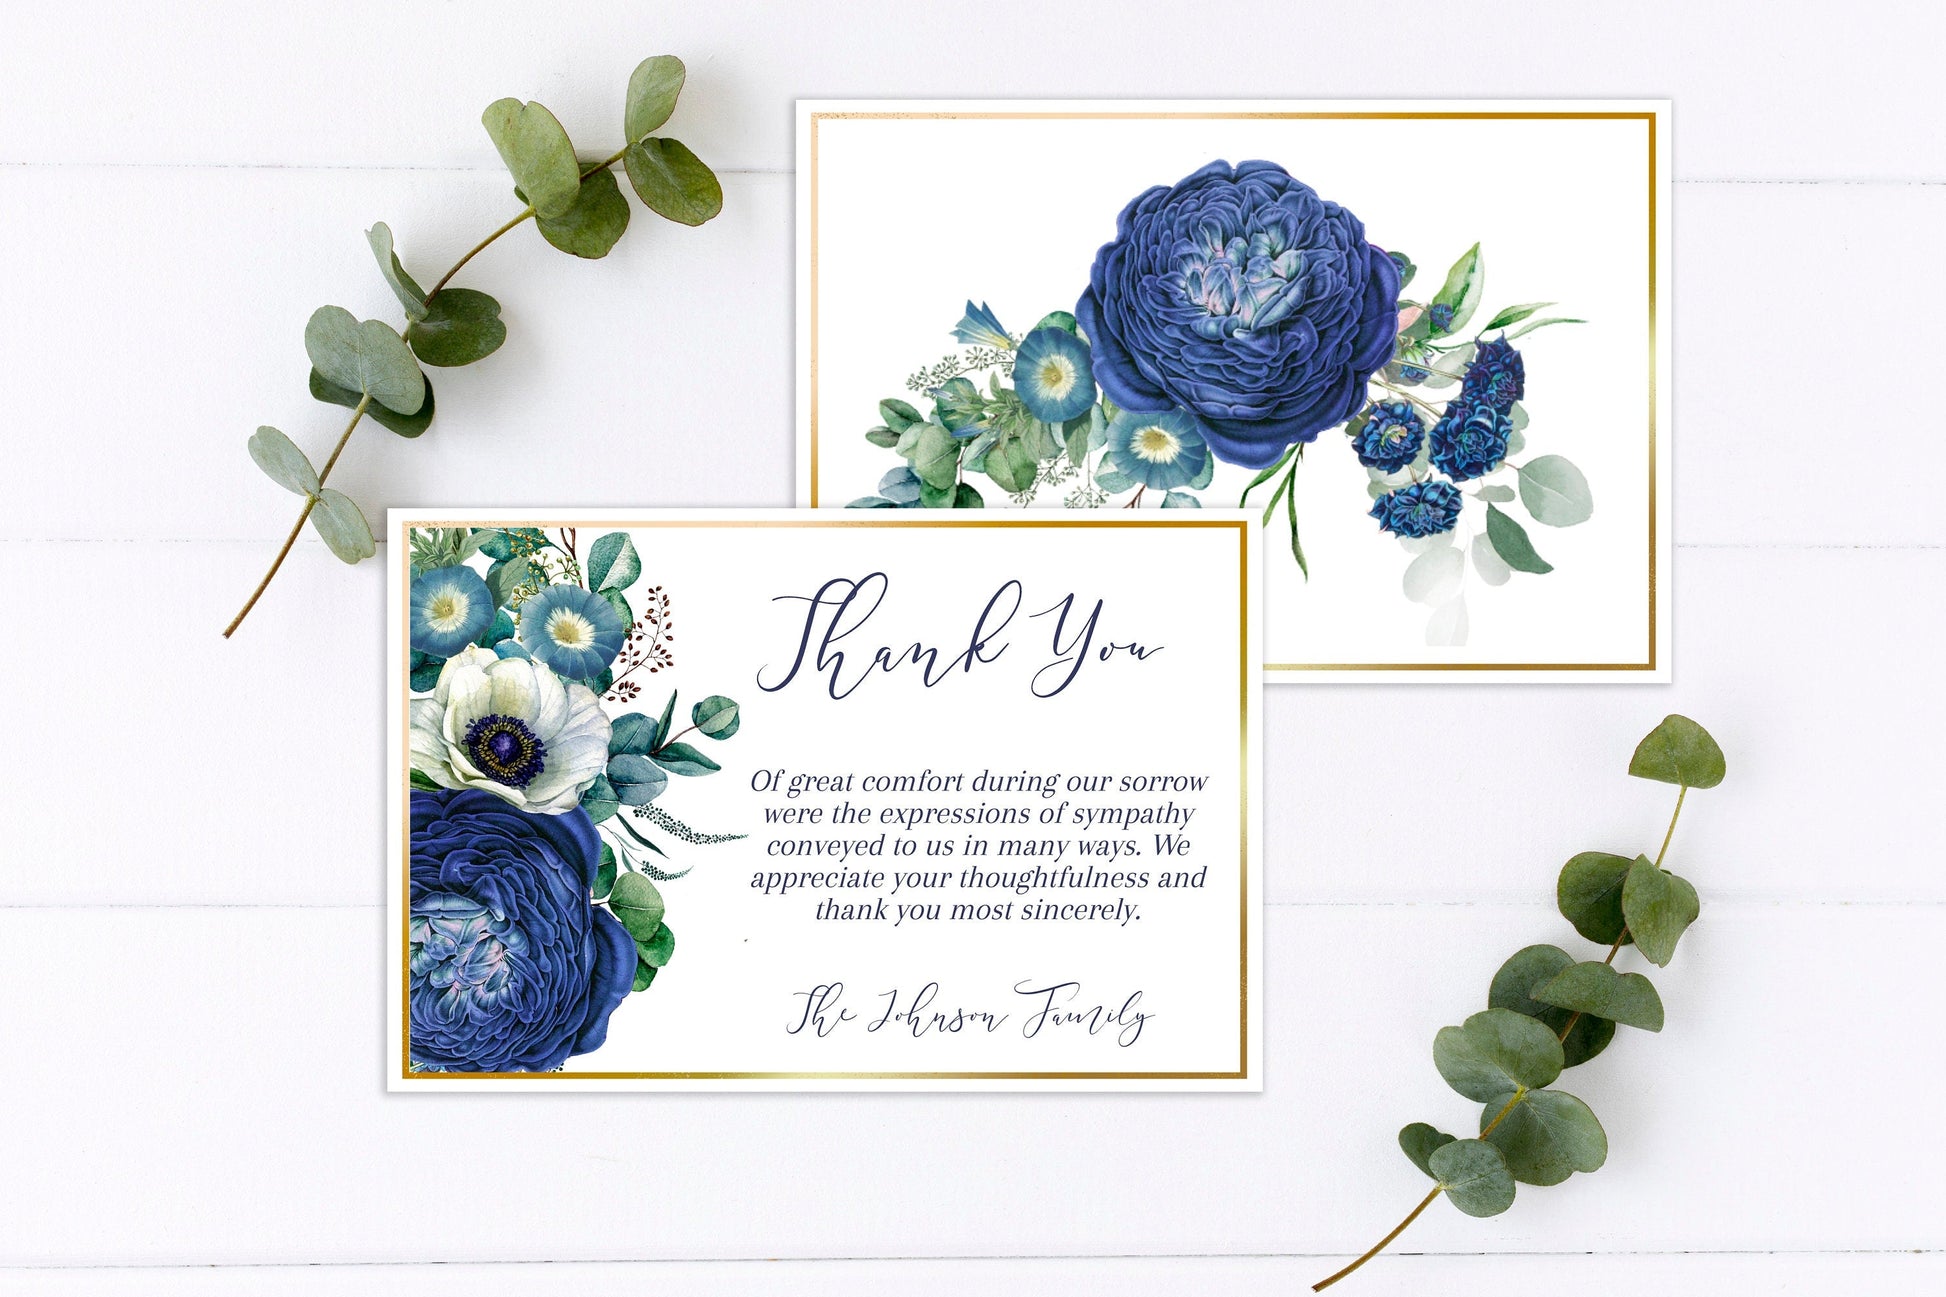 Thank you cards with a blue rose